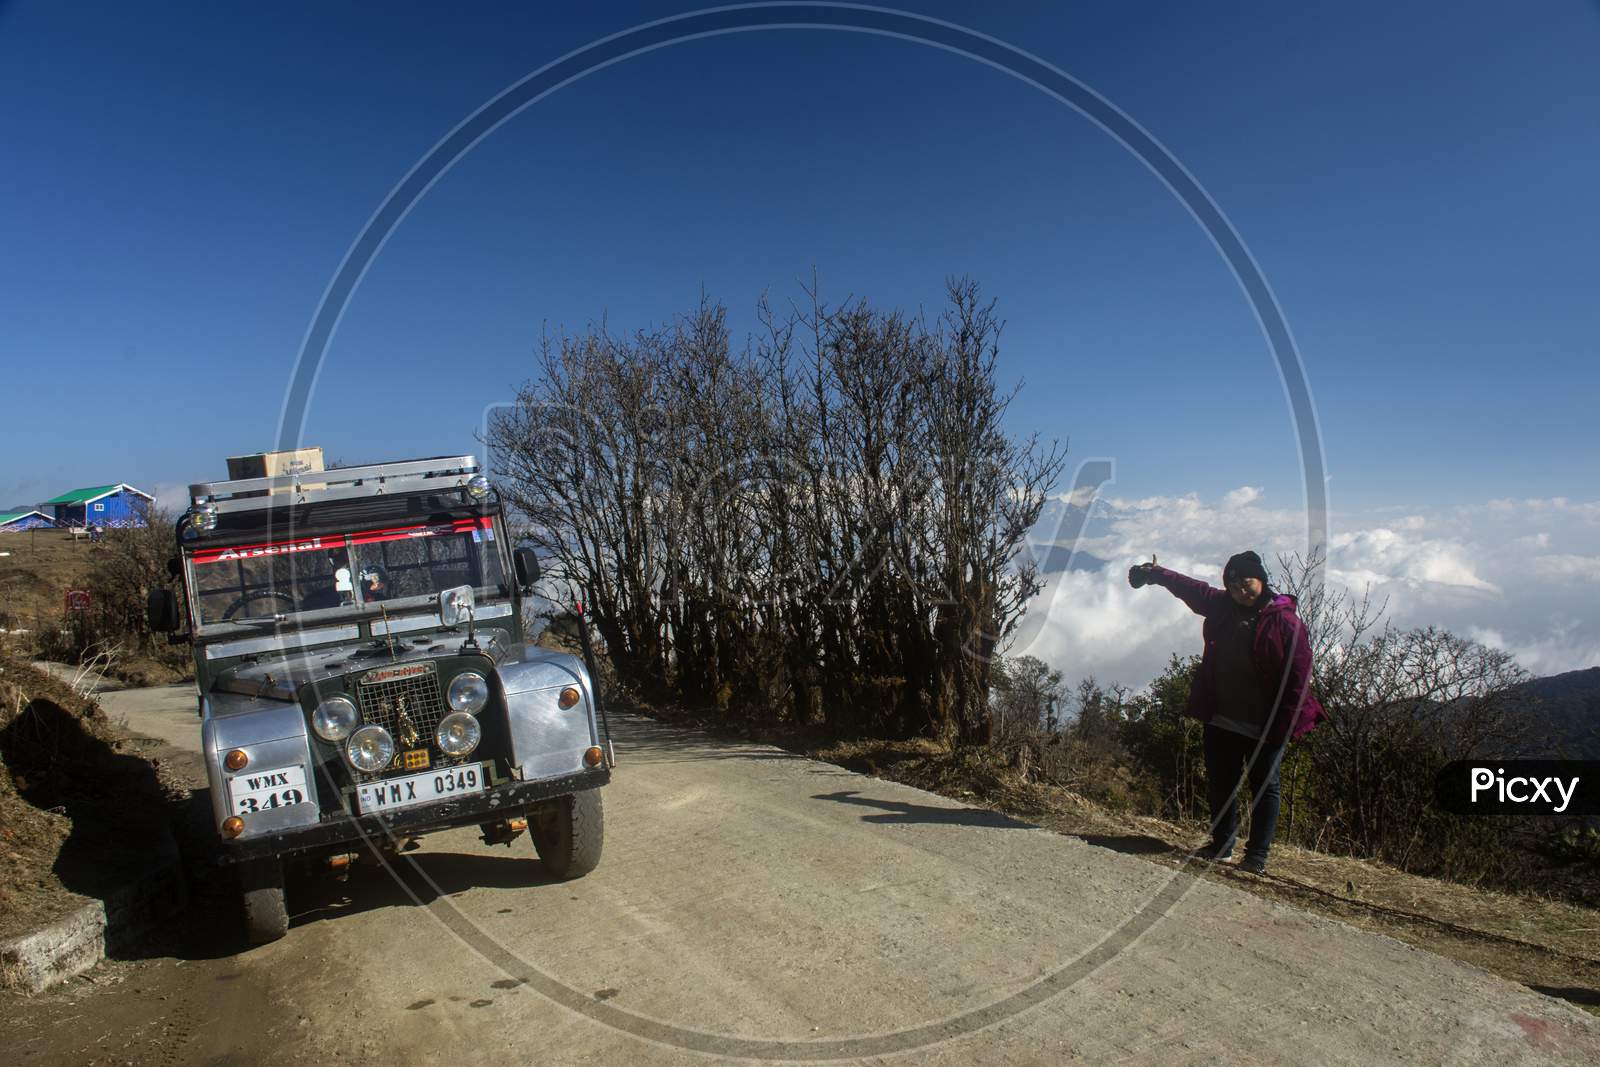 20 March, 2020, Sandakphu, West Bengal, India: A Female Traveller Standing Beside A Old Land Rover Car At Sandakphu, West Bengal.